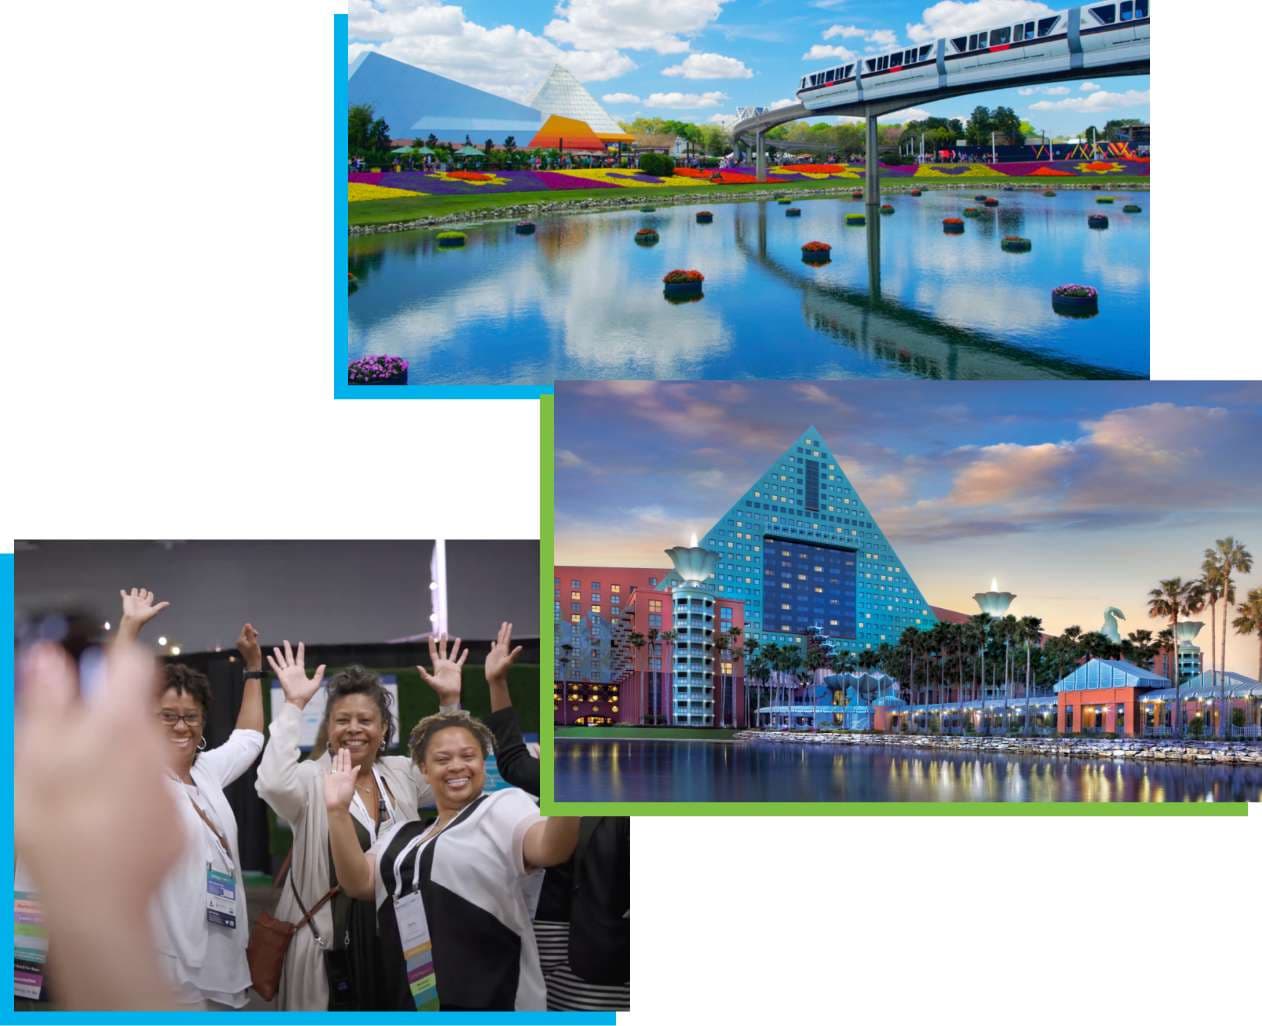 Collage of photos from the Swan & Dolphin resort and past conferences